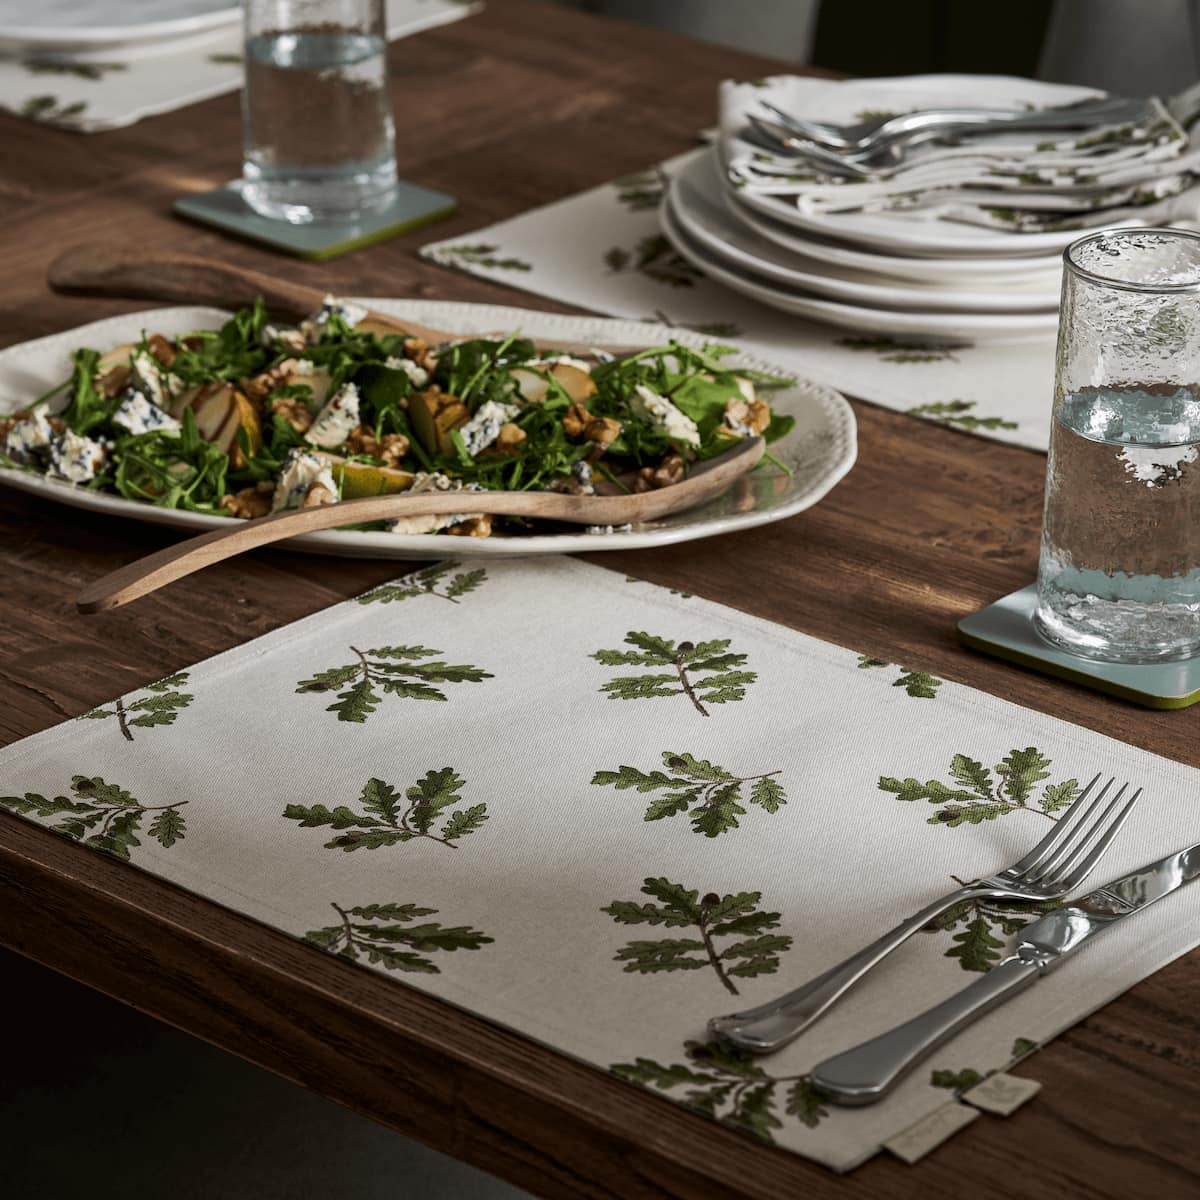 Acorn and Oak Leaves Fabric Placemat (Set of 2) 